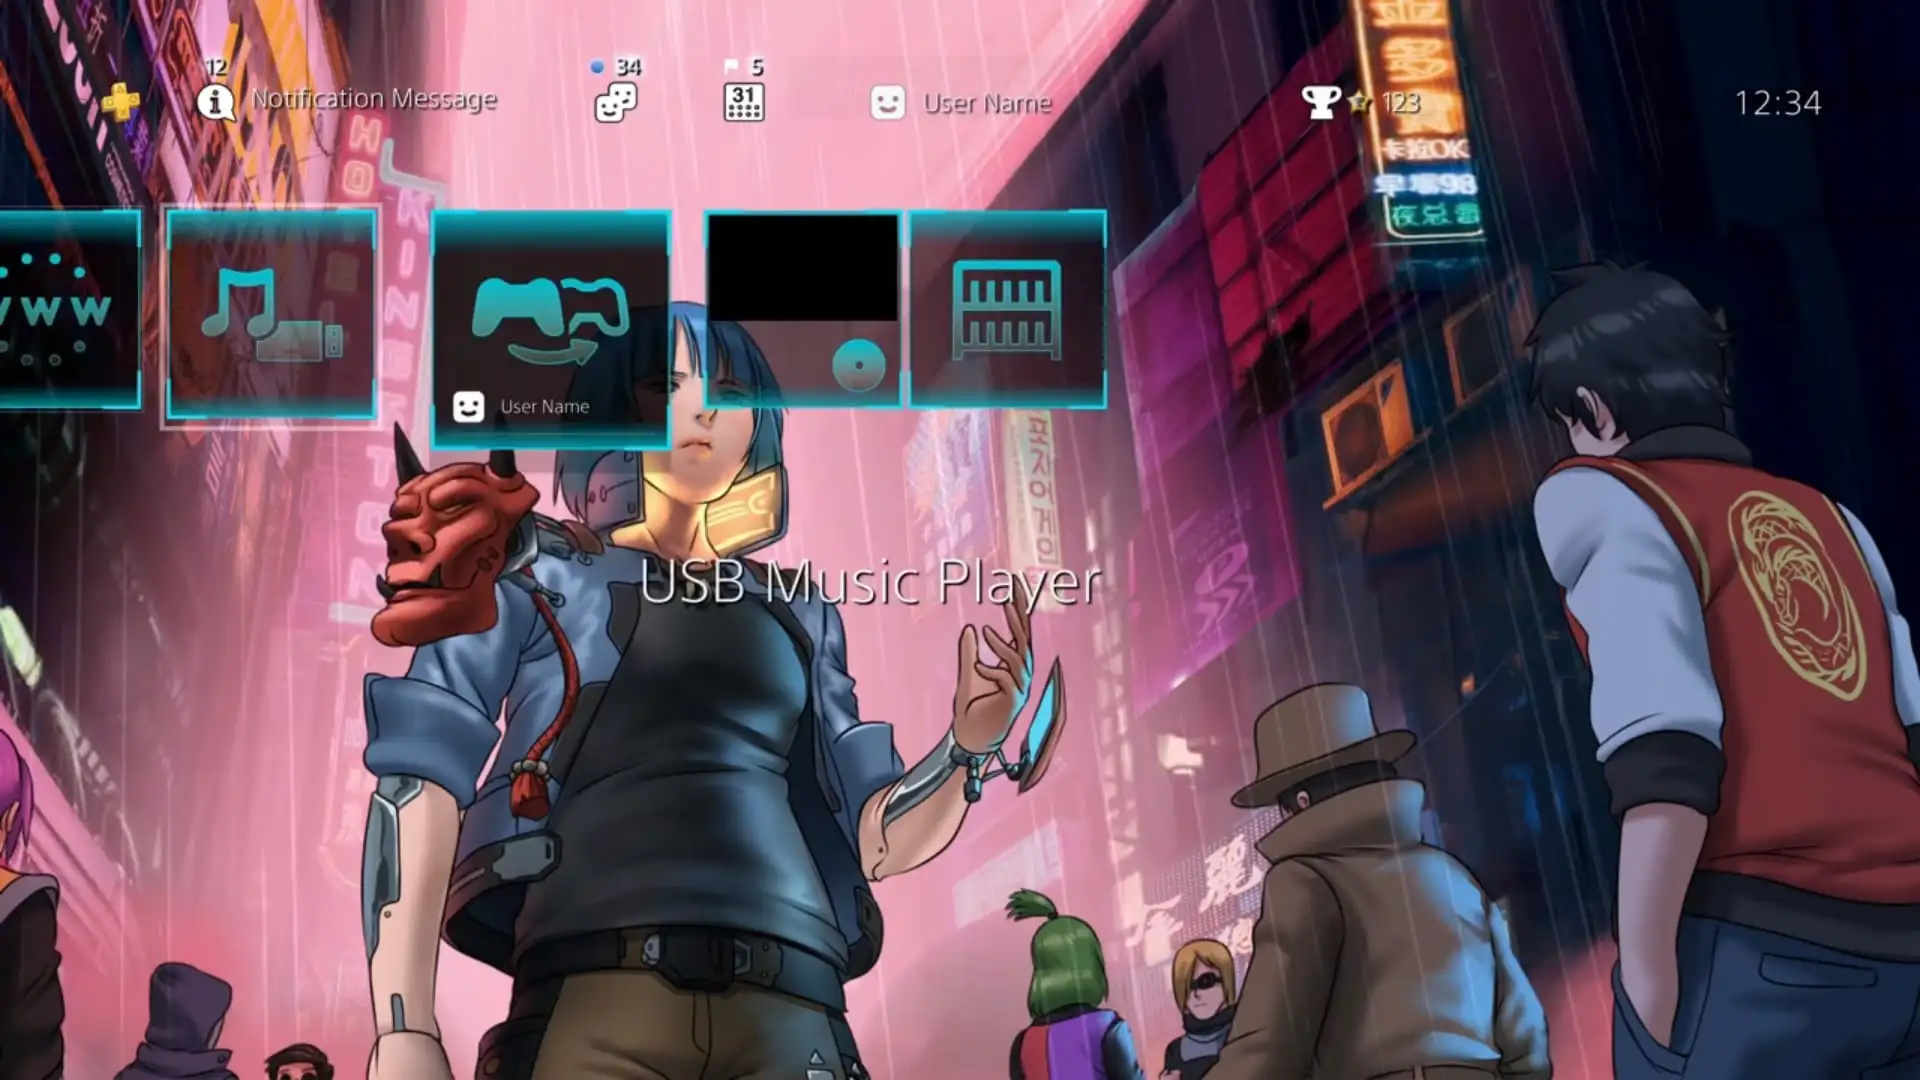 10 Best Ps4 Themes From November 19